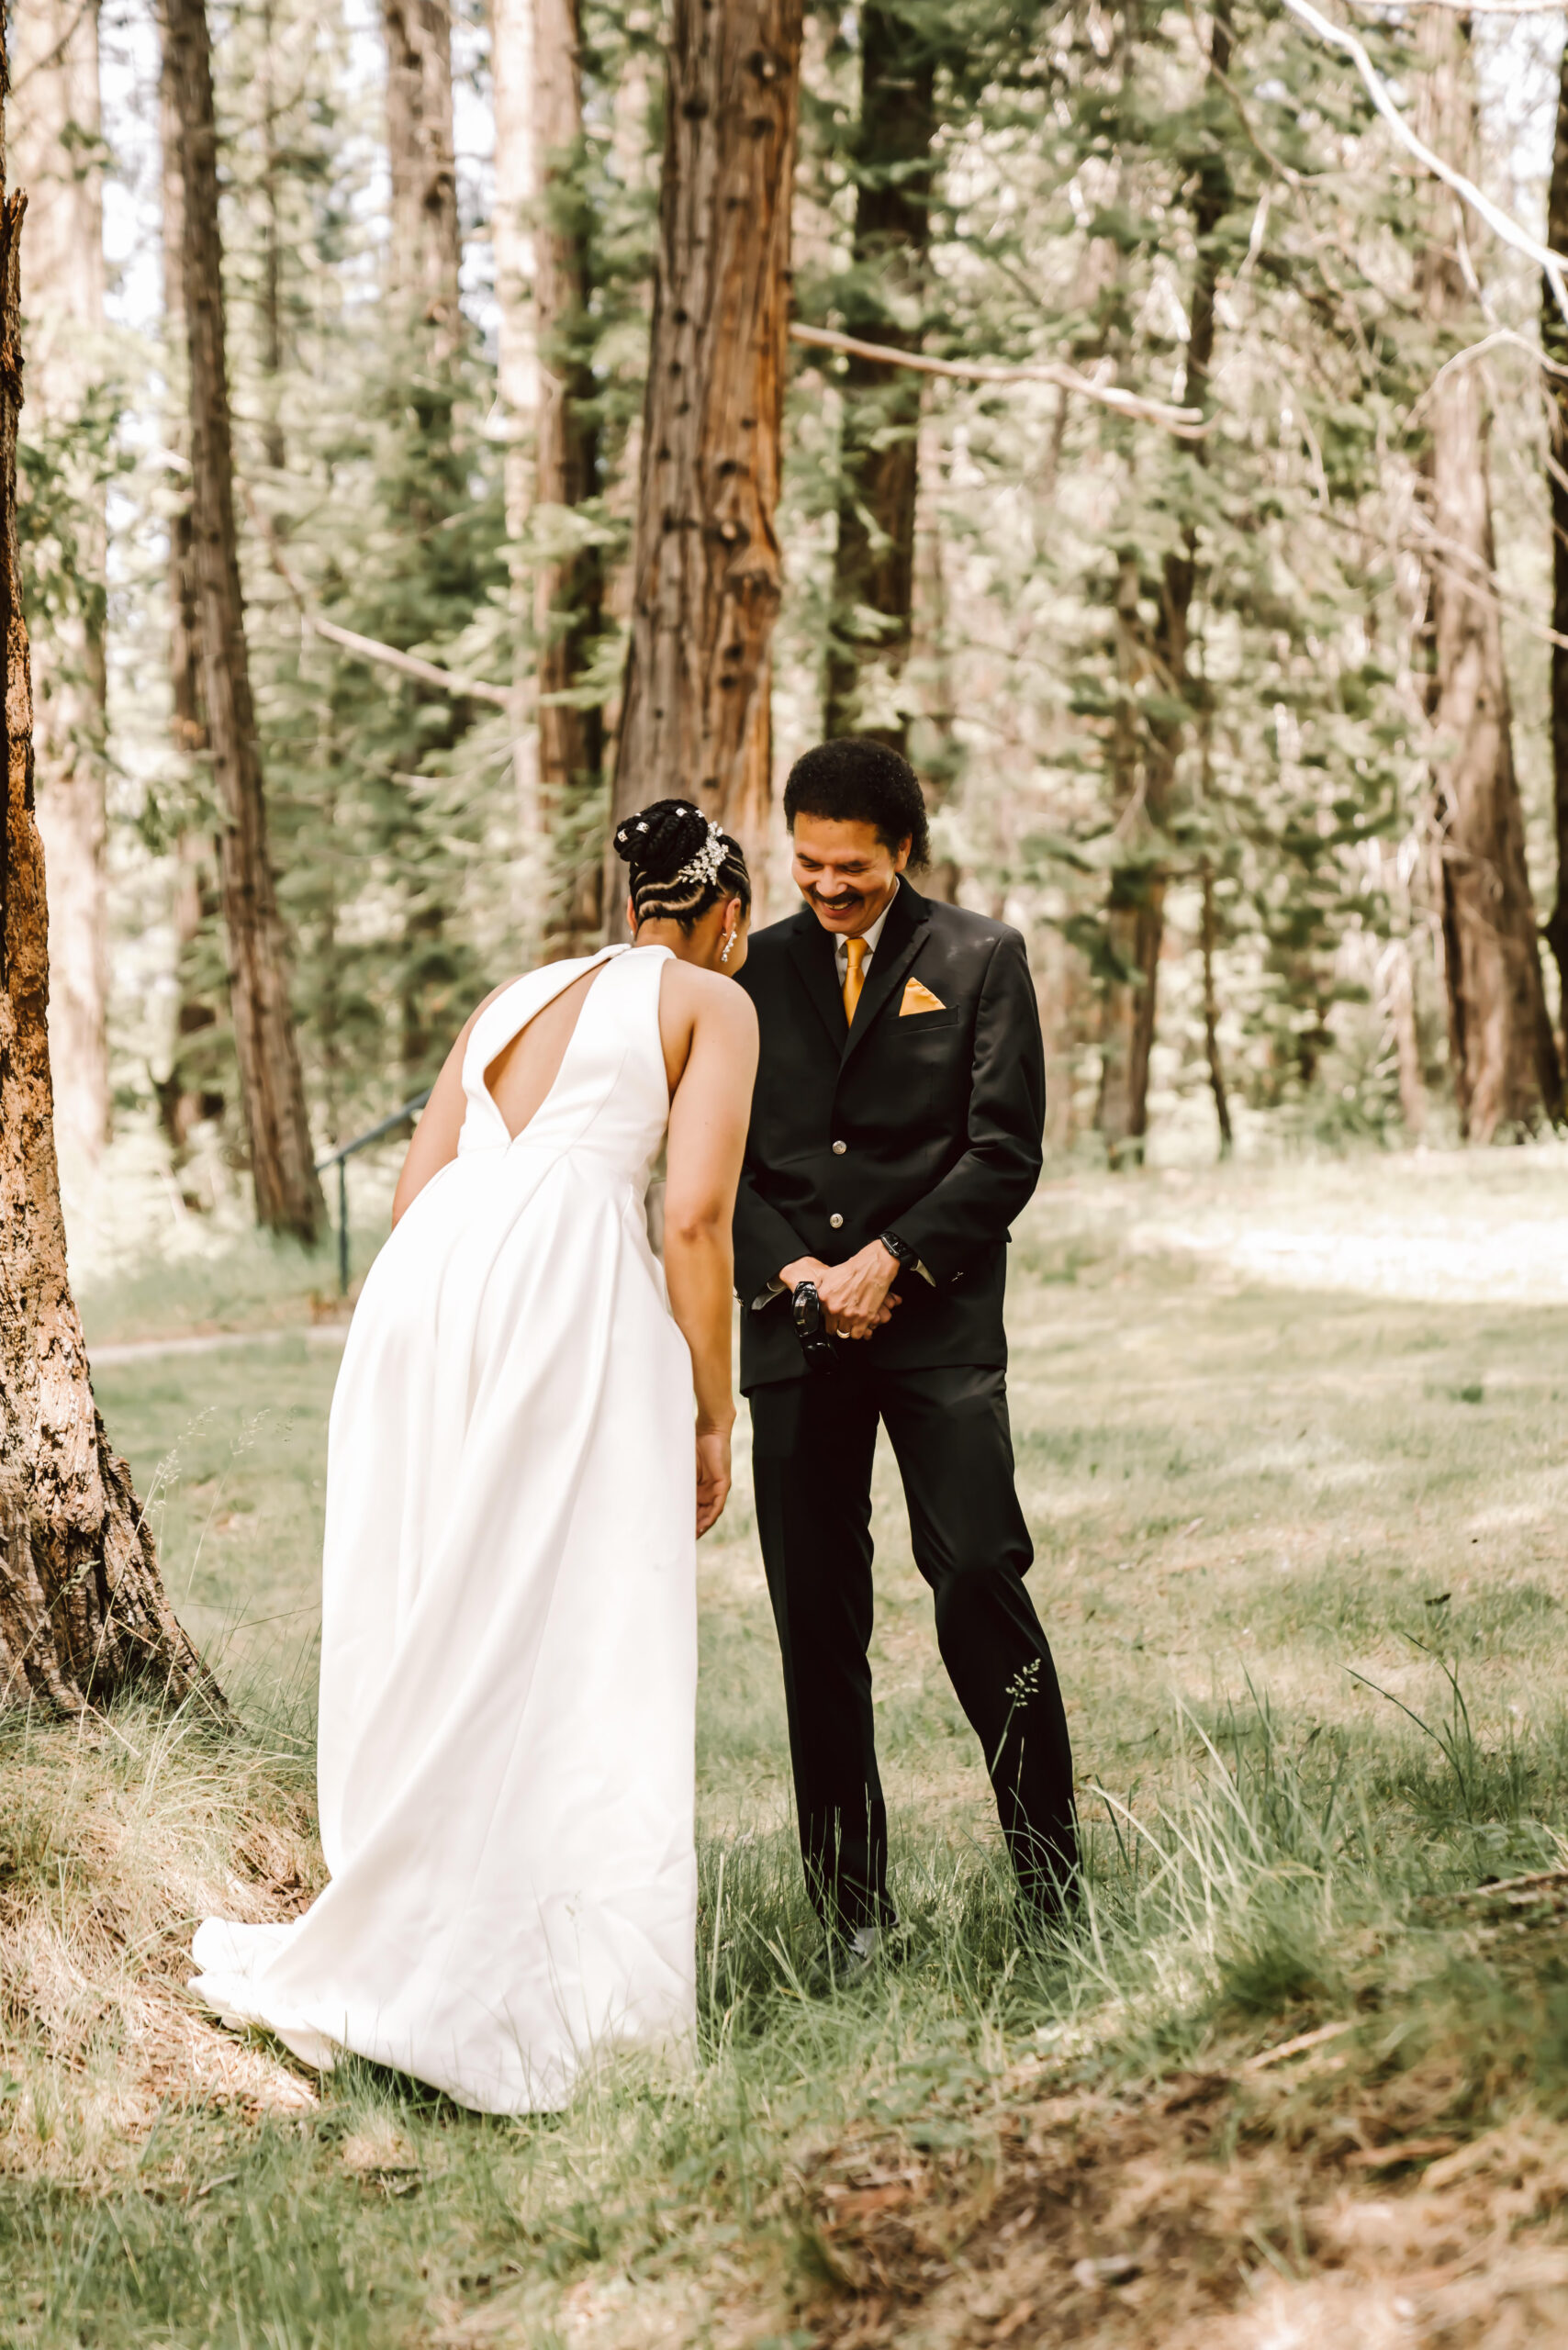 A dad seeing his daughter for first look in the forest for her wedding day in Yosemite National Park